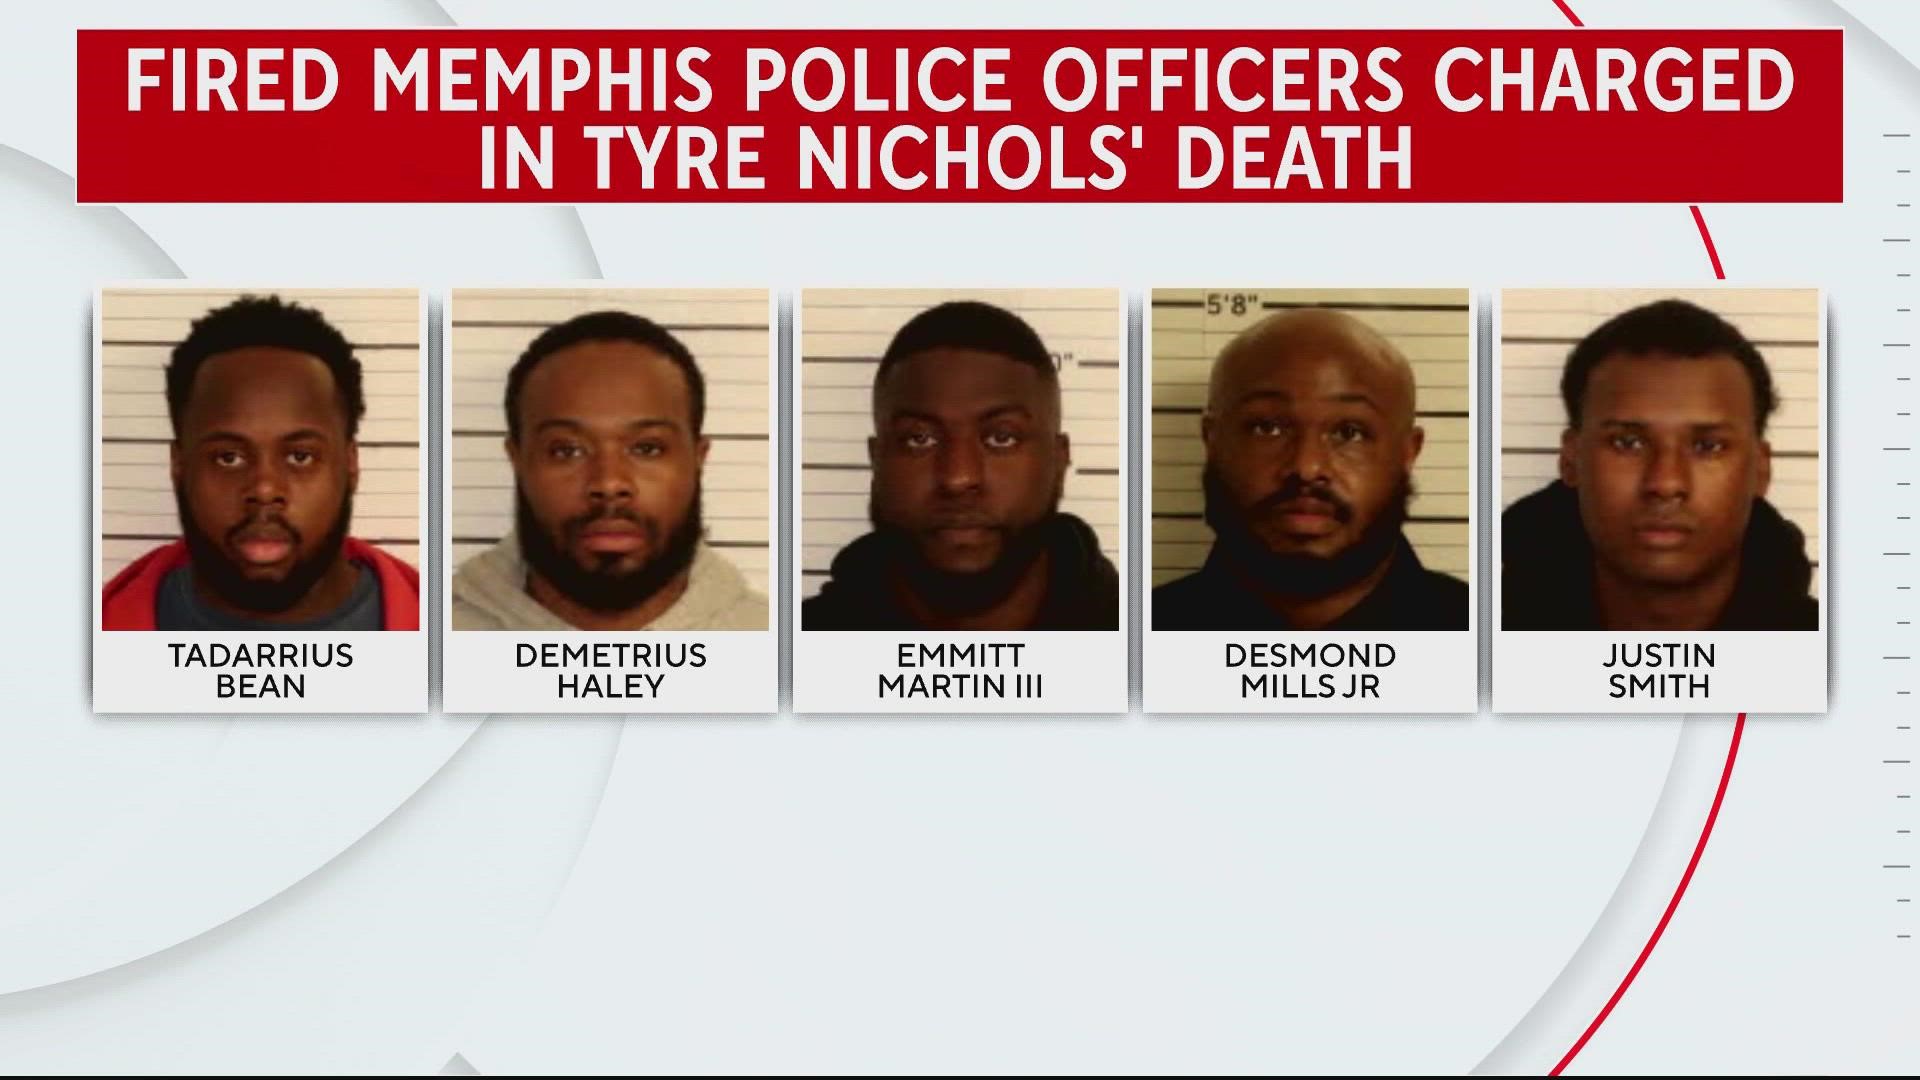 DC Police have been warned by law enforcement partners to expect a disturbing video regarding Tyre Nichols' death to be released.